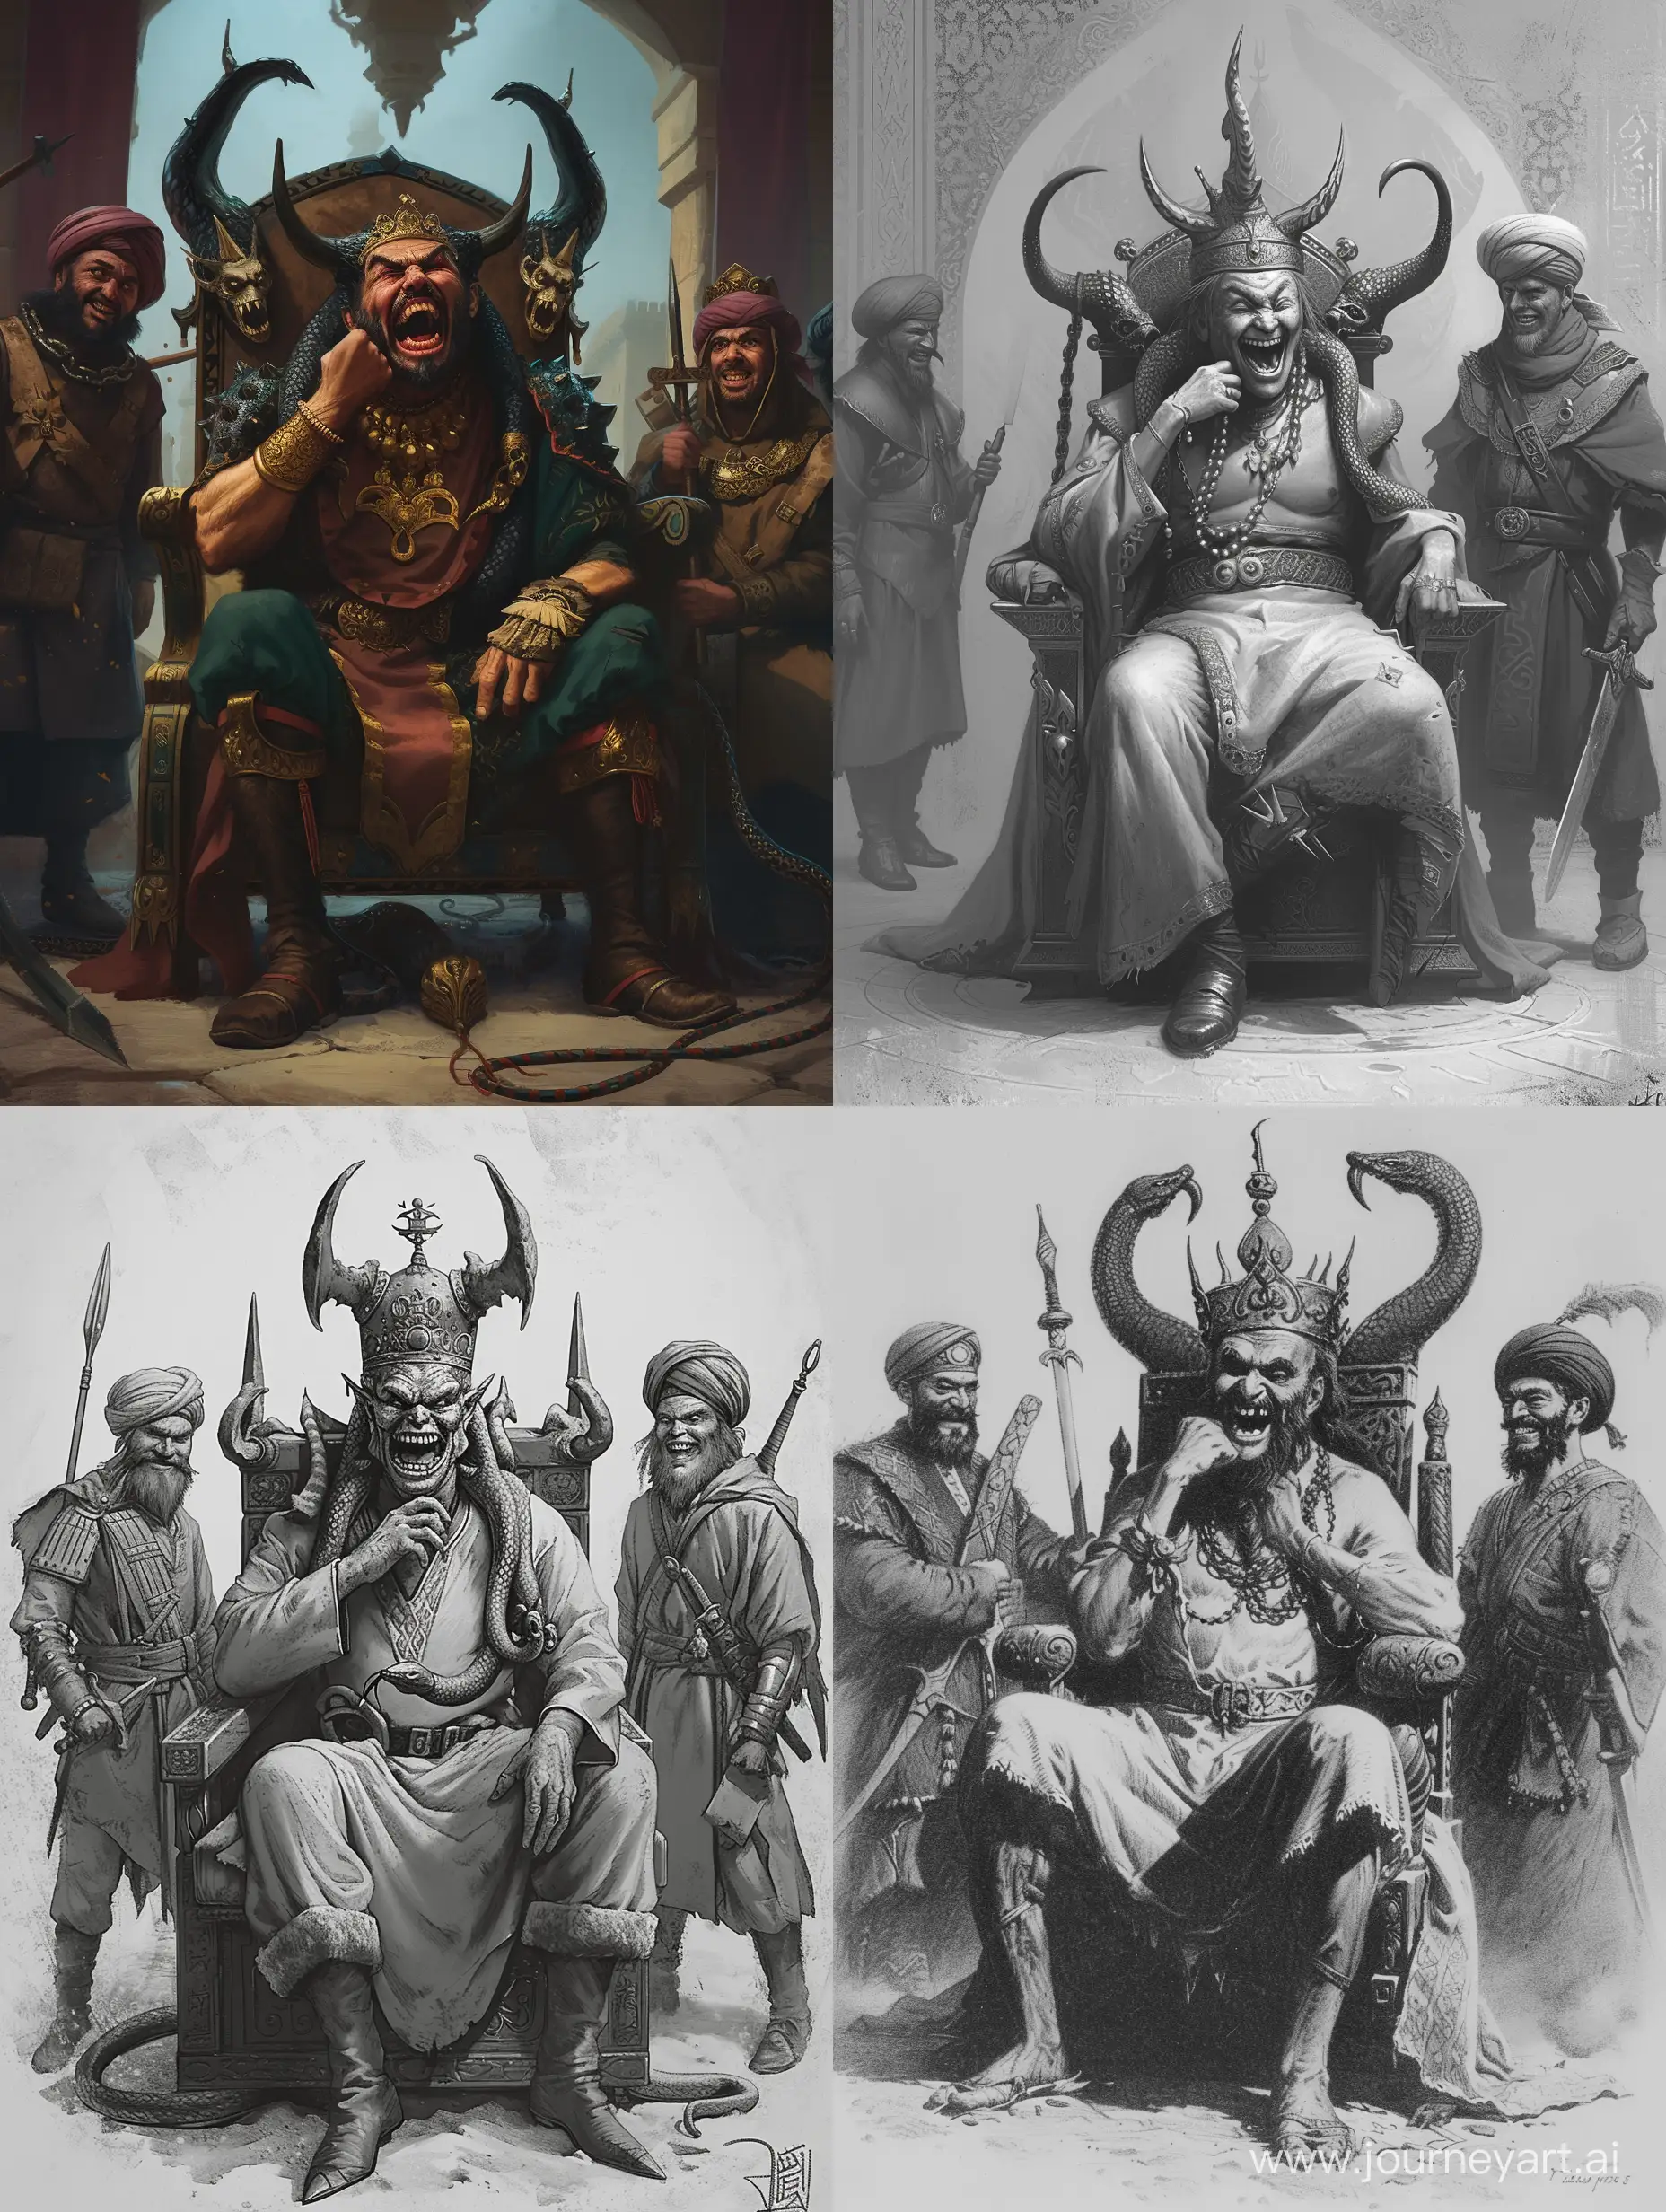 An ancient evil king with a serpent's head protruding from each shoulder sits on a royal chair with a two-horned crown, with his hand under his chin and laughs menacingly, and on the right side of the chair stands a fearsome Arab soldier and  To the left of the chair stands a fearsome Mongol soldier with a sword in his hand